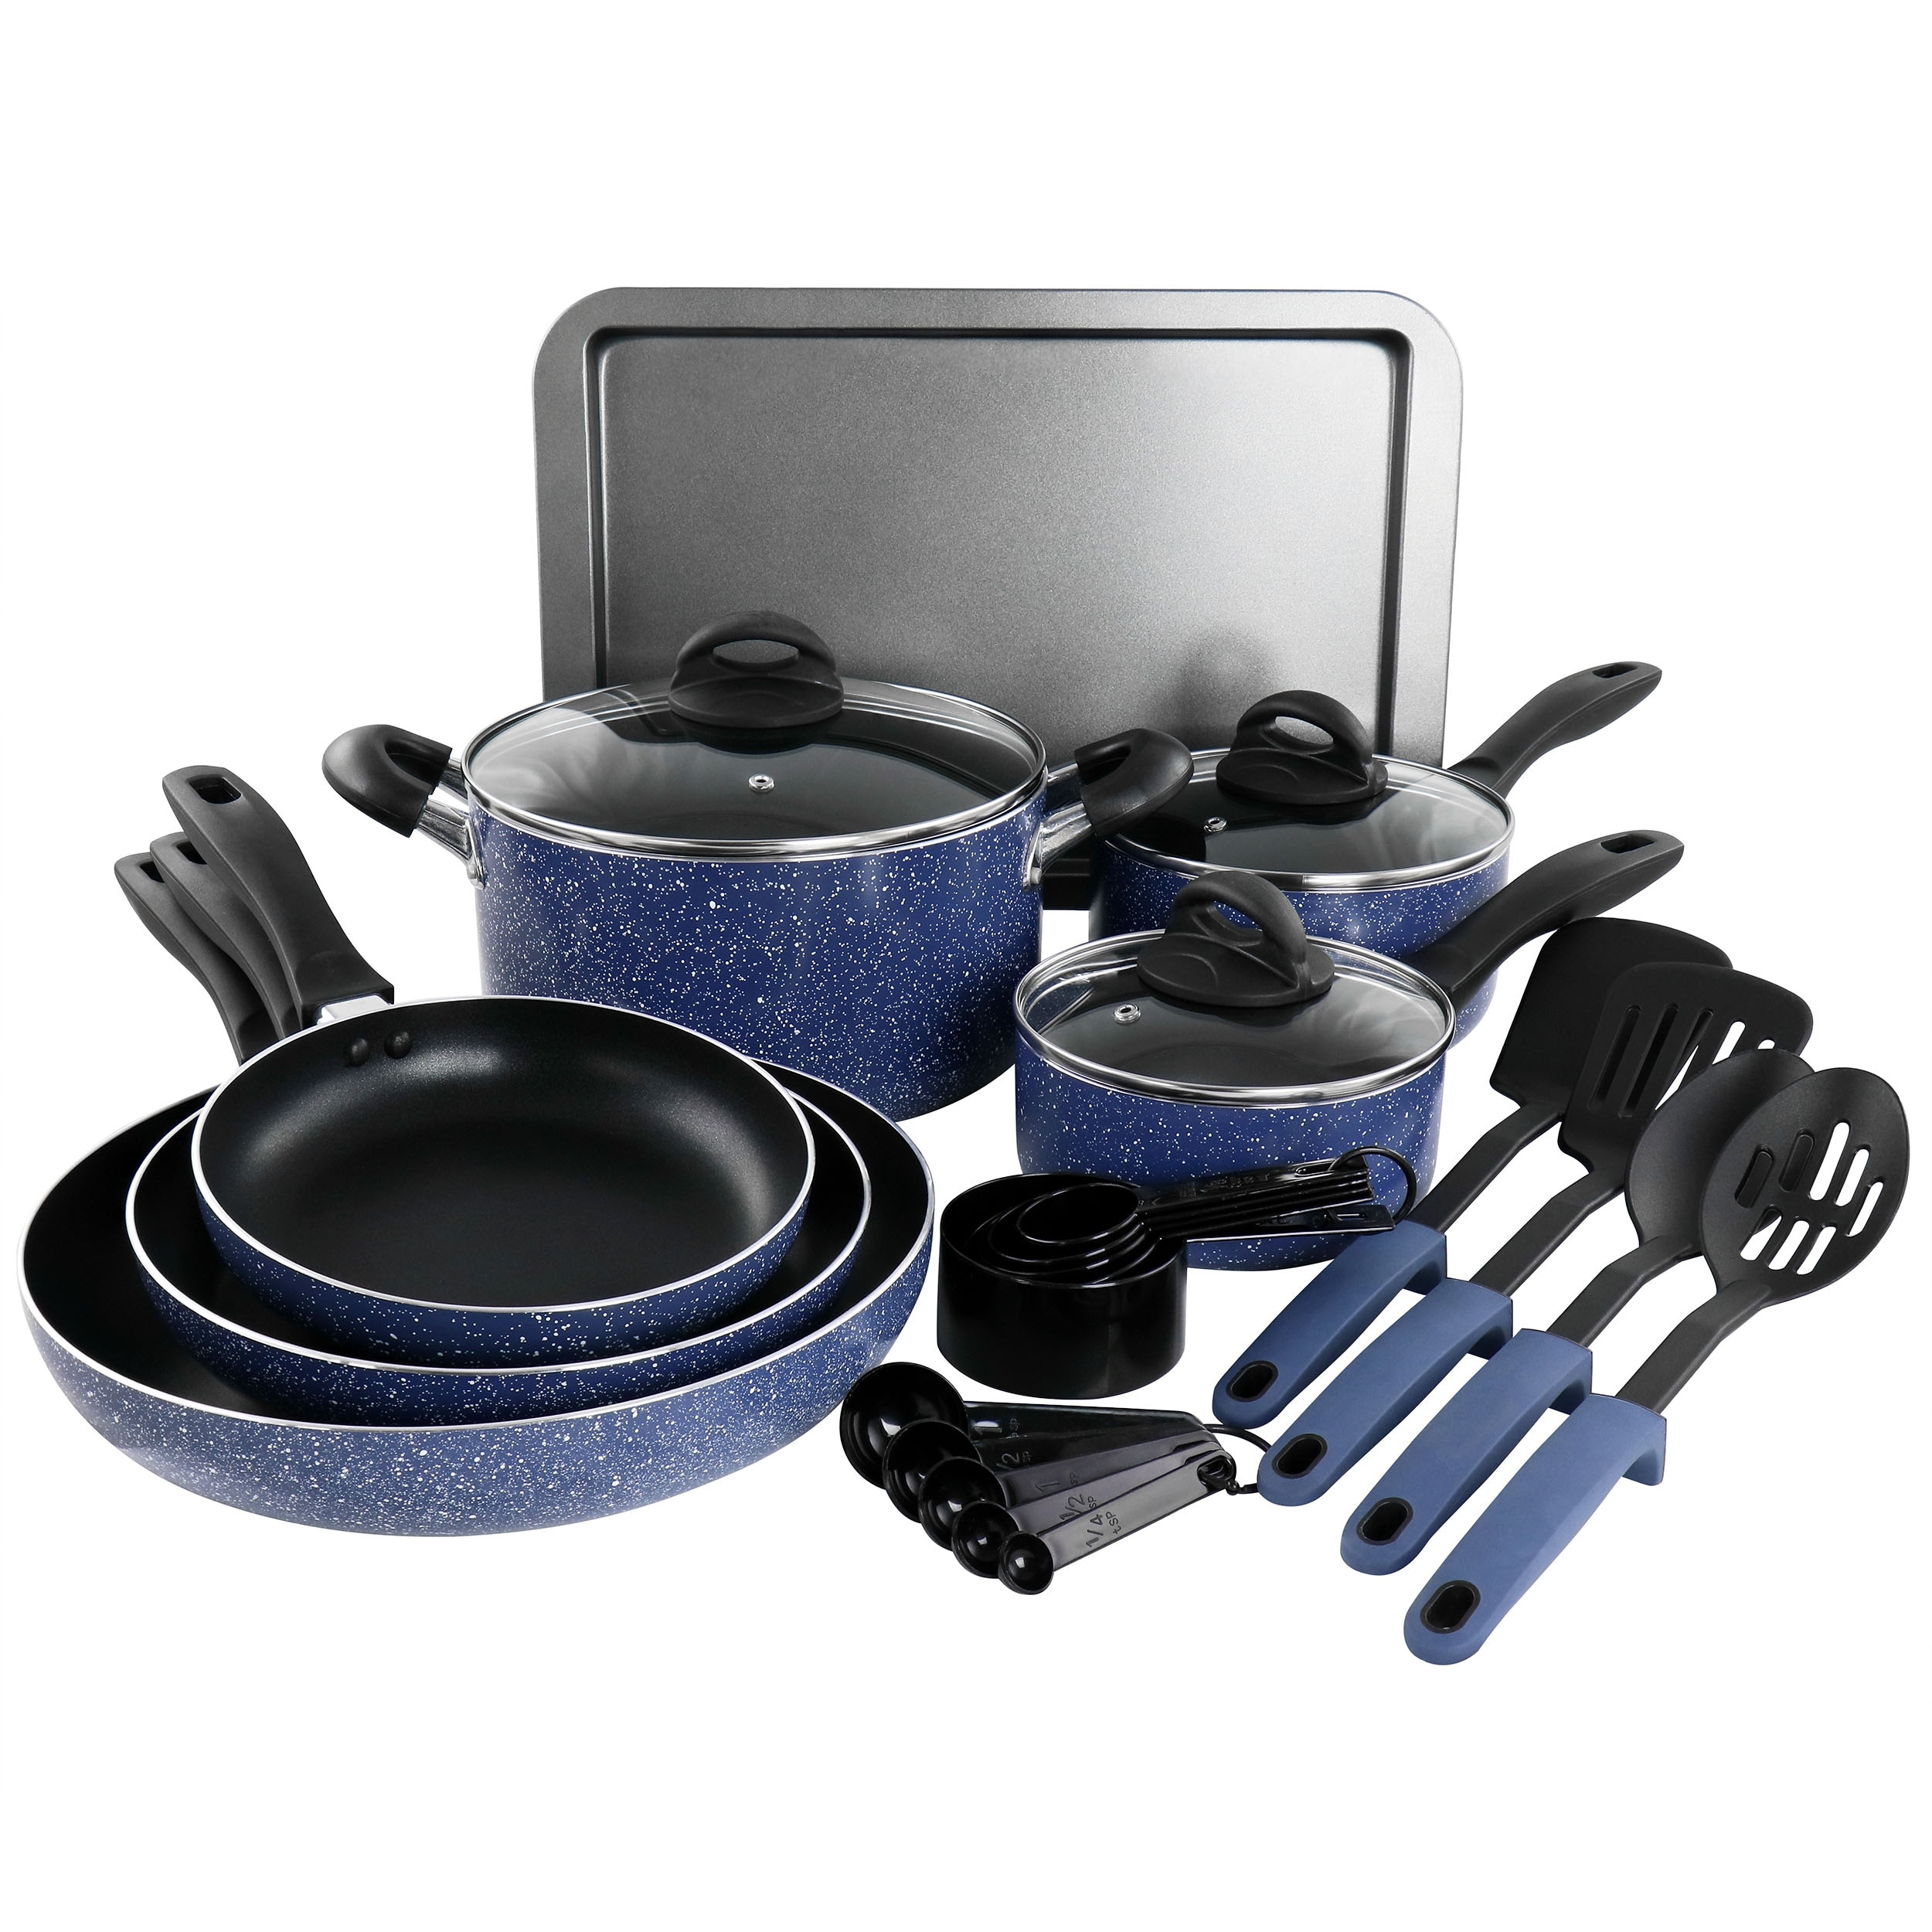 https://ak1.ostkcdn.com/images/products/is/images/direct/ae4ec794ea35fb1e797fc4e7bb6e7d2cafc9782f/Granite-Nonstick-Cooking-Excellence-24-Piece-Cookware-Set-in-Blue.jpg